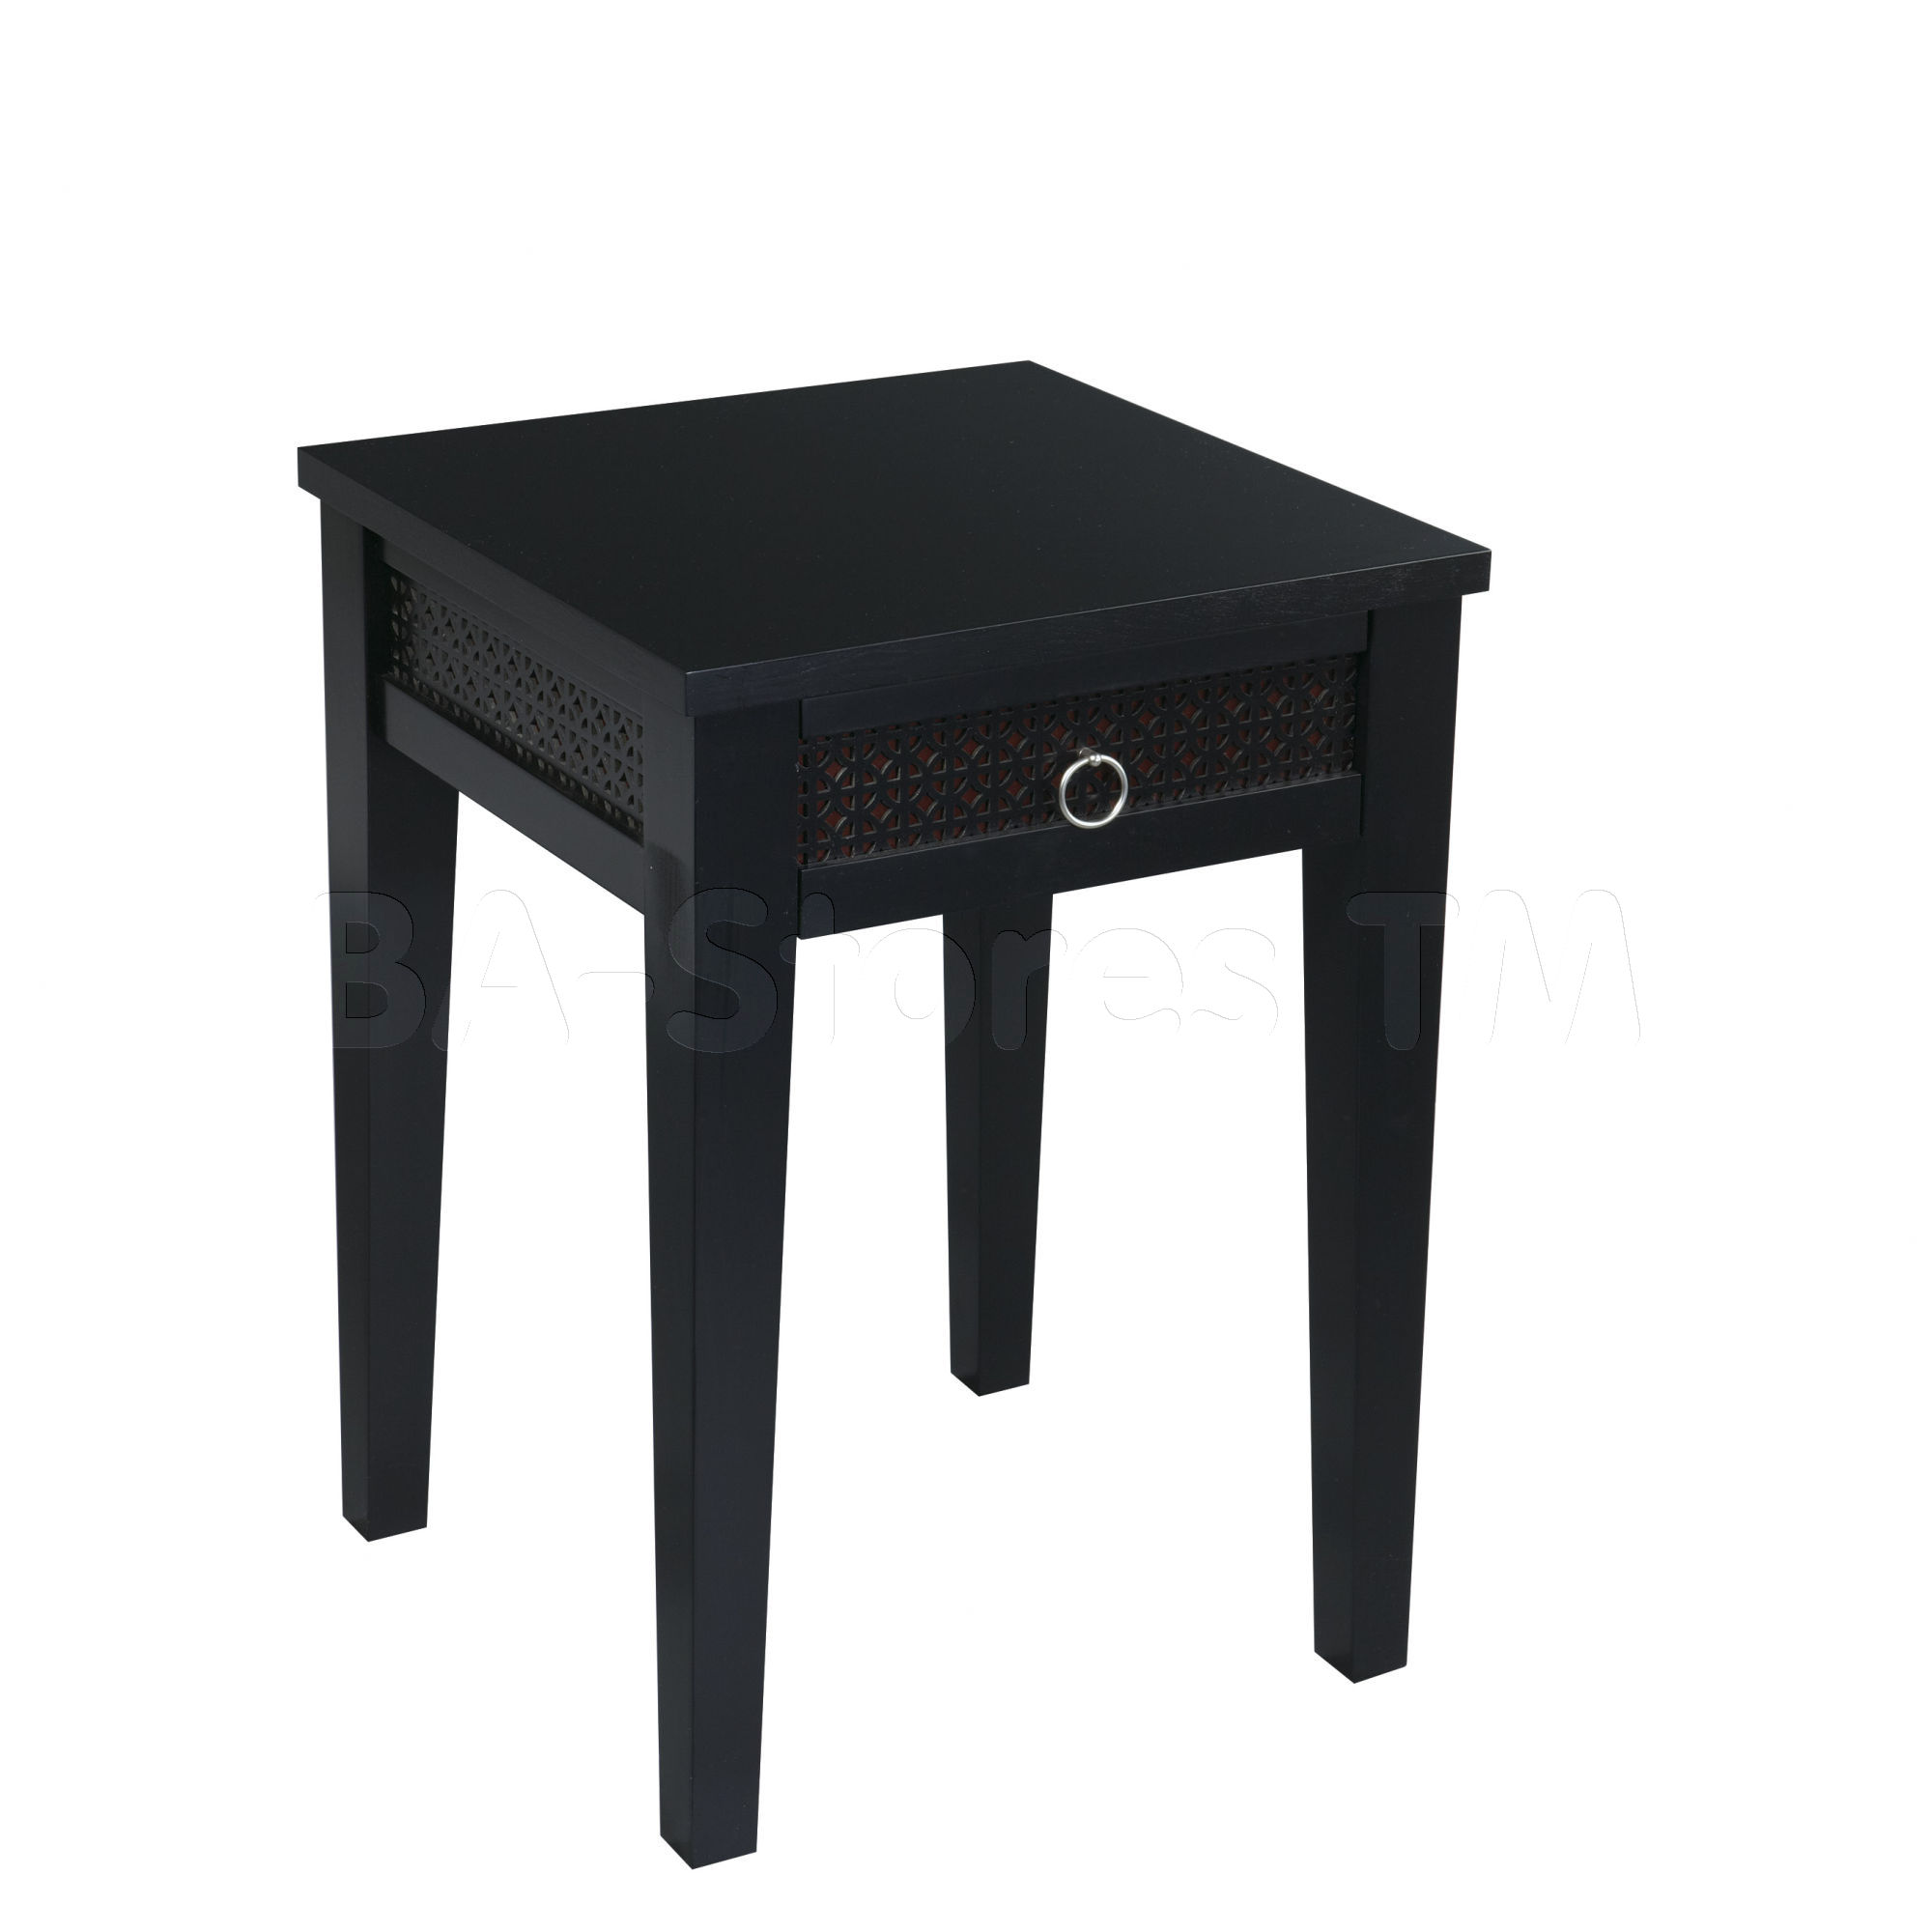 small pine lamp table the super fun black side with drawer round wooden curvy legs having furniture square drawers four mini tables chic design complete your decoration dog kennel